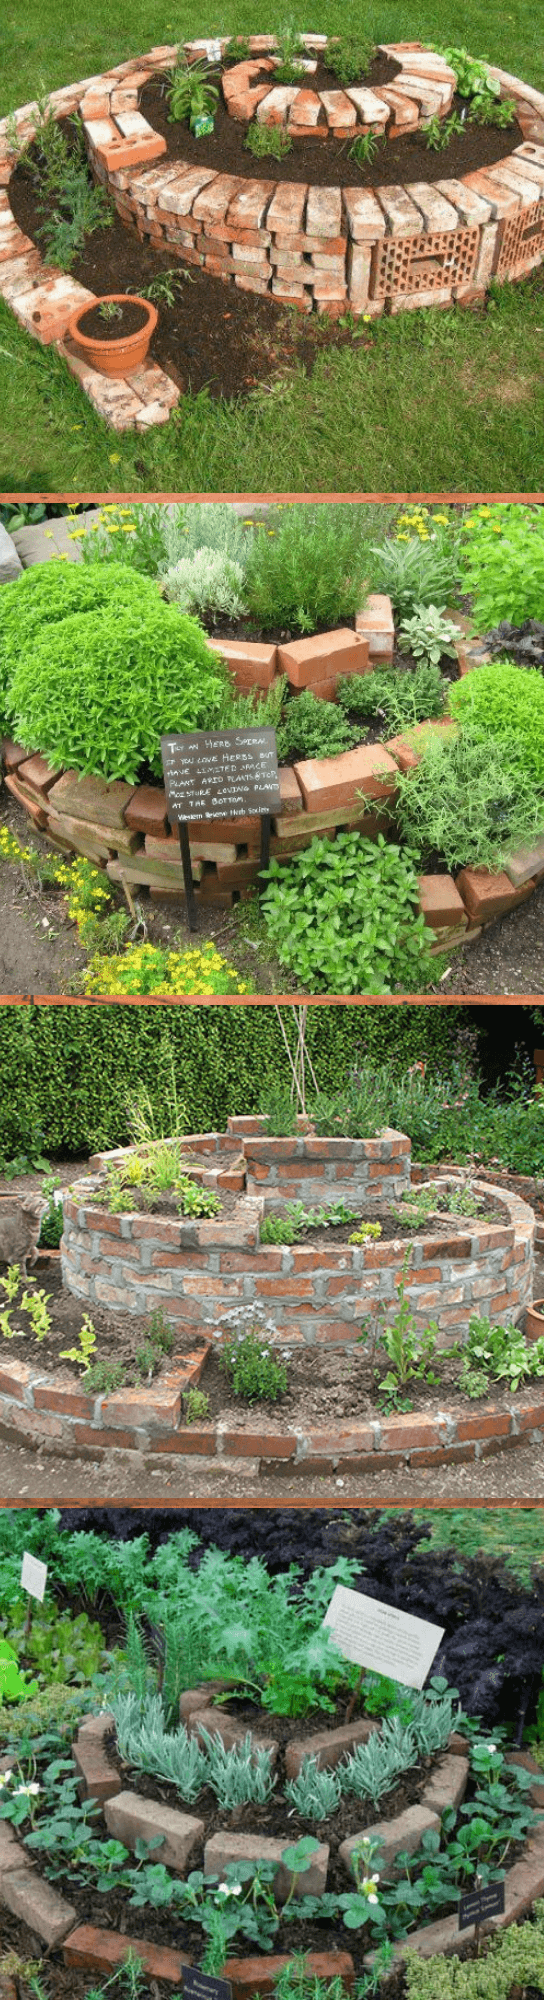 How to build a herb spiral with bricks